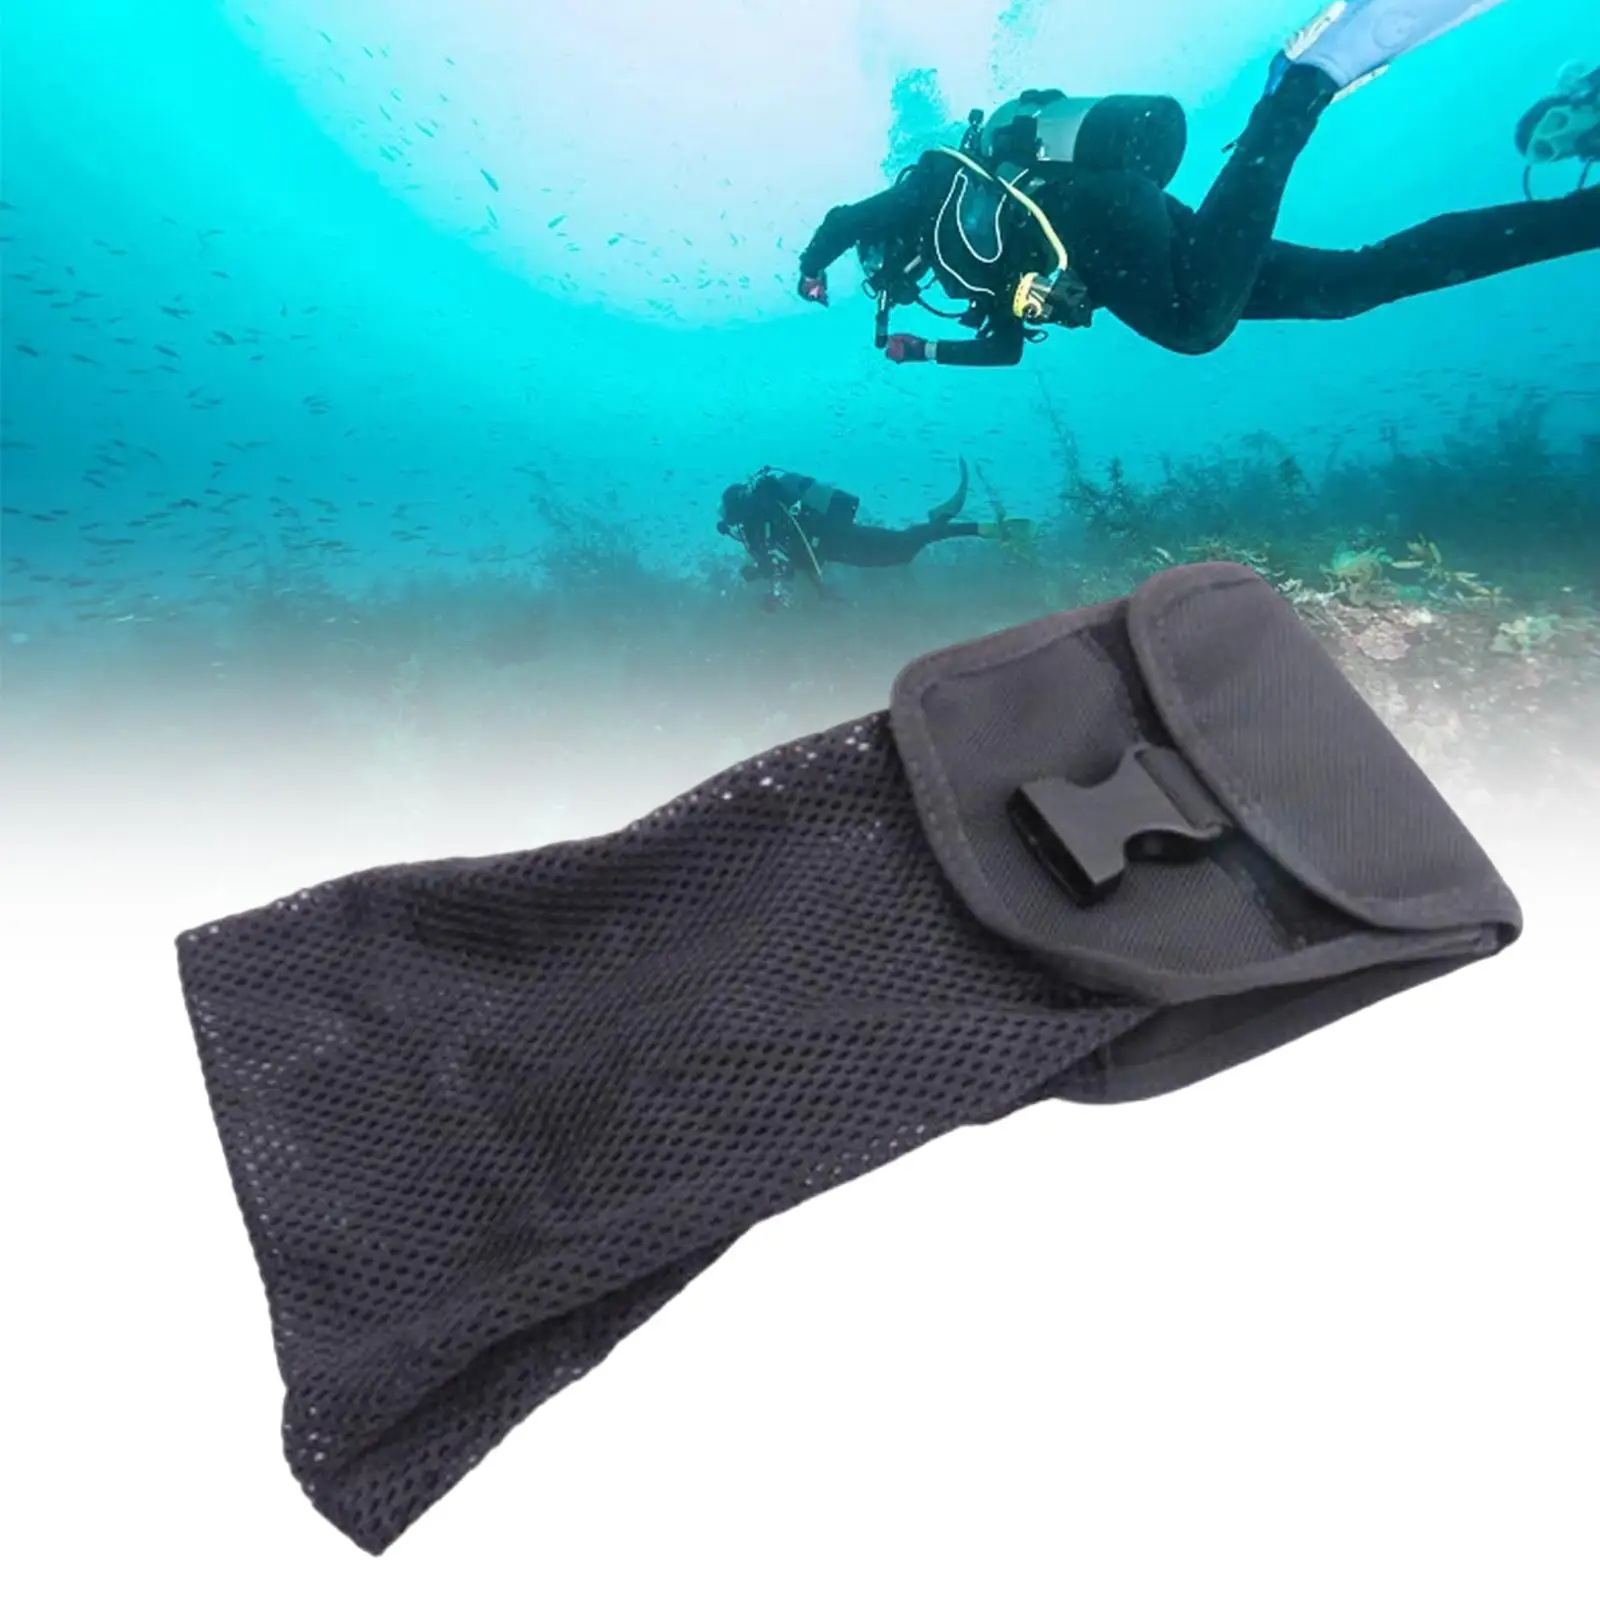 Scuba Diving Mesh Pouch Storage Holder Snorkelling Pack Carry Gear Bag for Fins